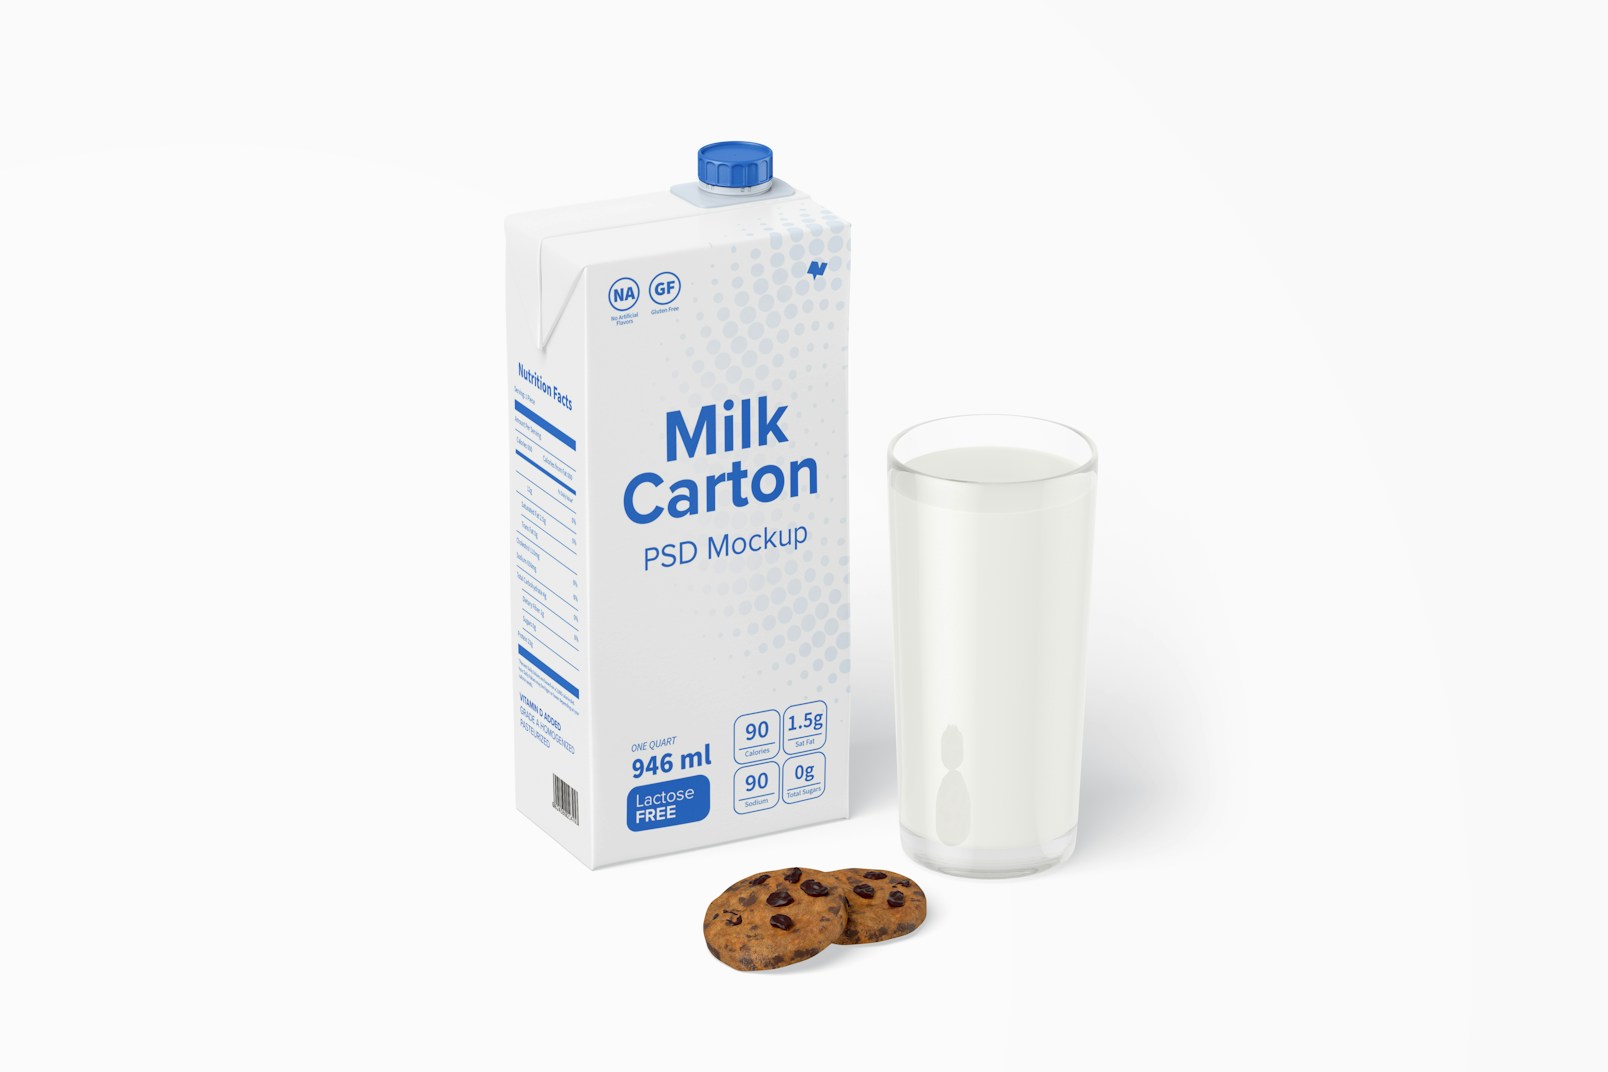 Milk Carton with Glass and Cookies Mockup